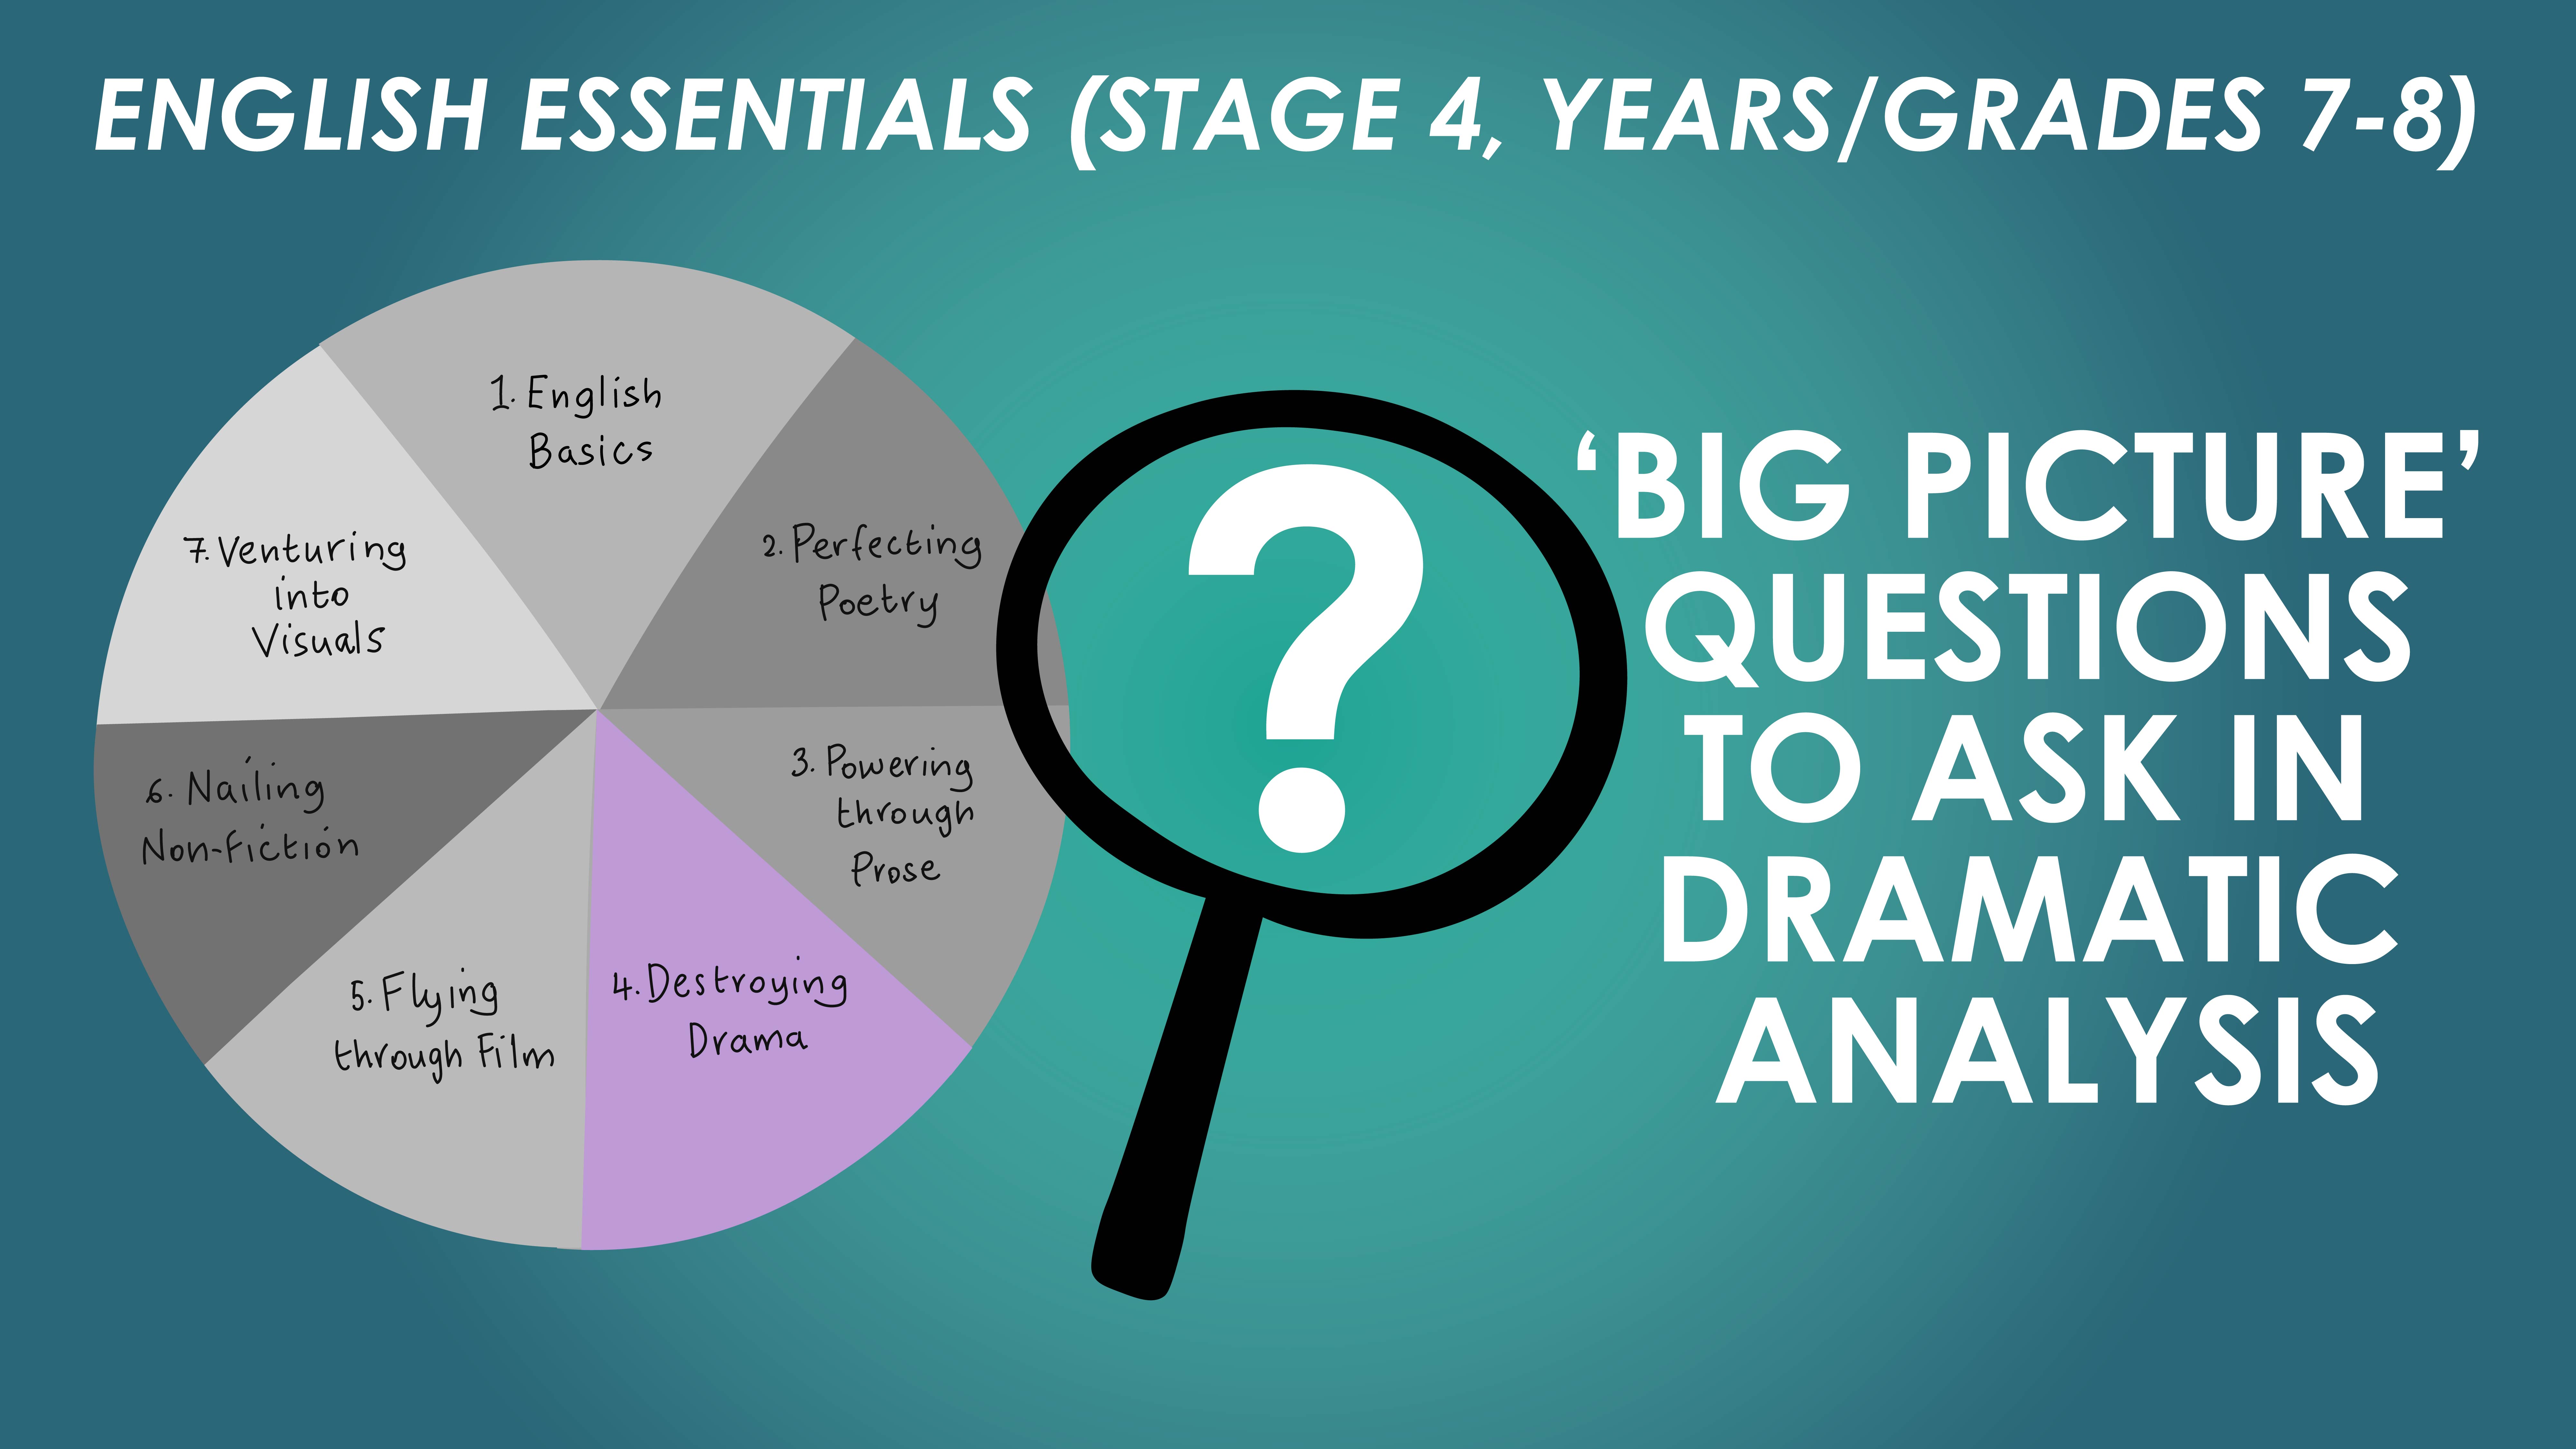 English Essentials - Destroying Drama - 'Big Picture' Questions to ask in Dramatic Analysis (Stage 4, Years/Grades 7-8)